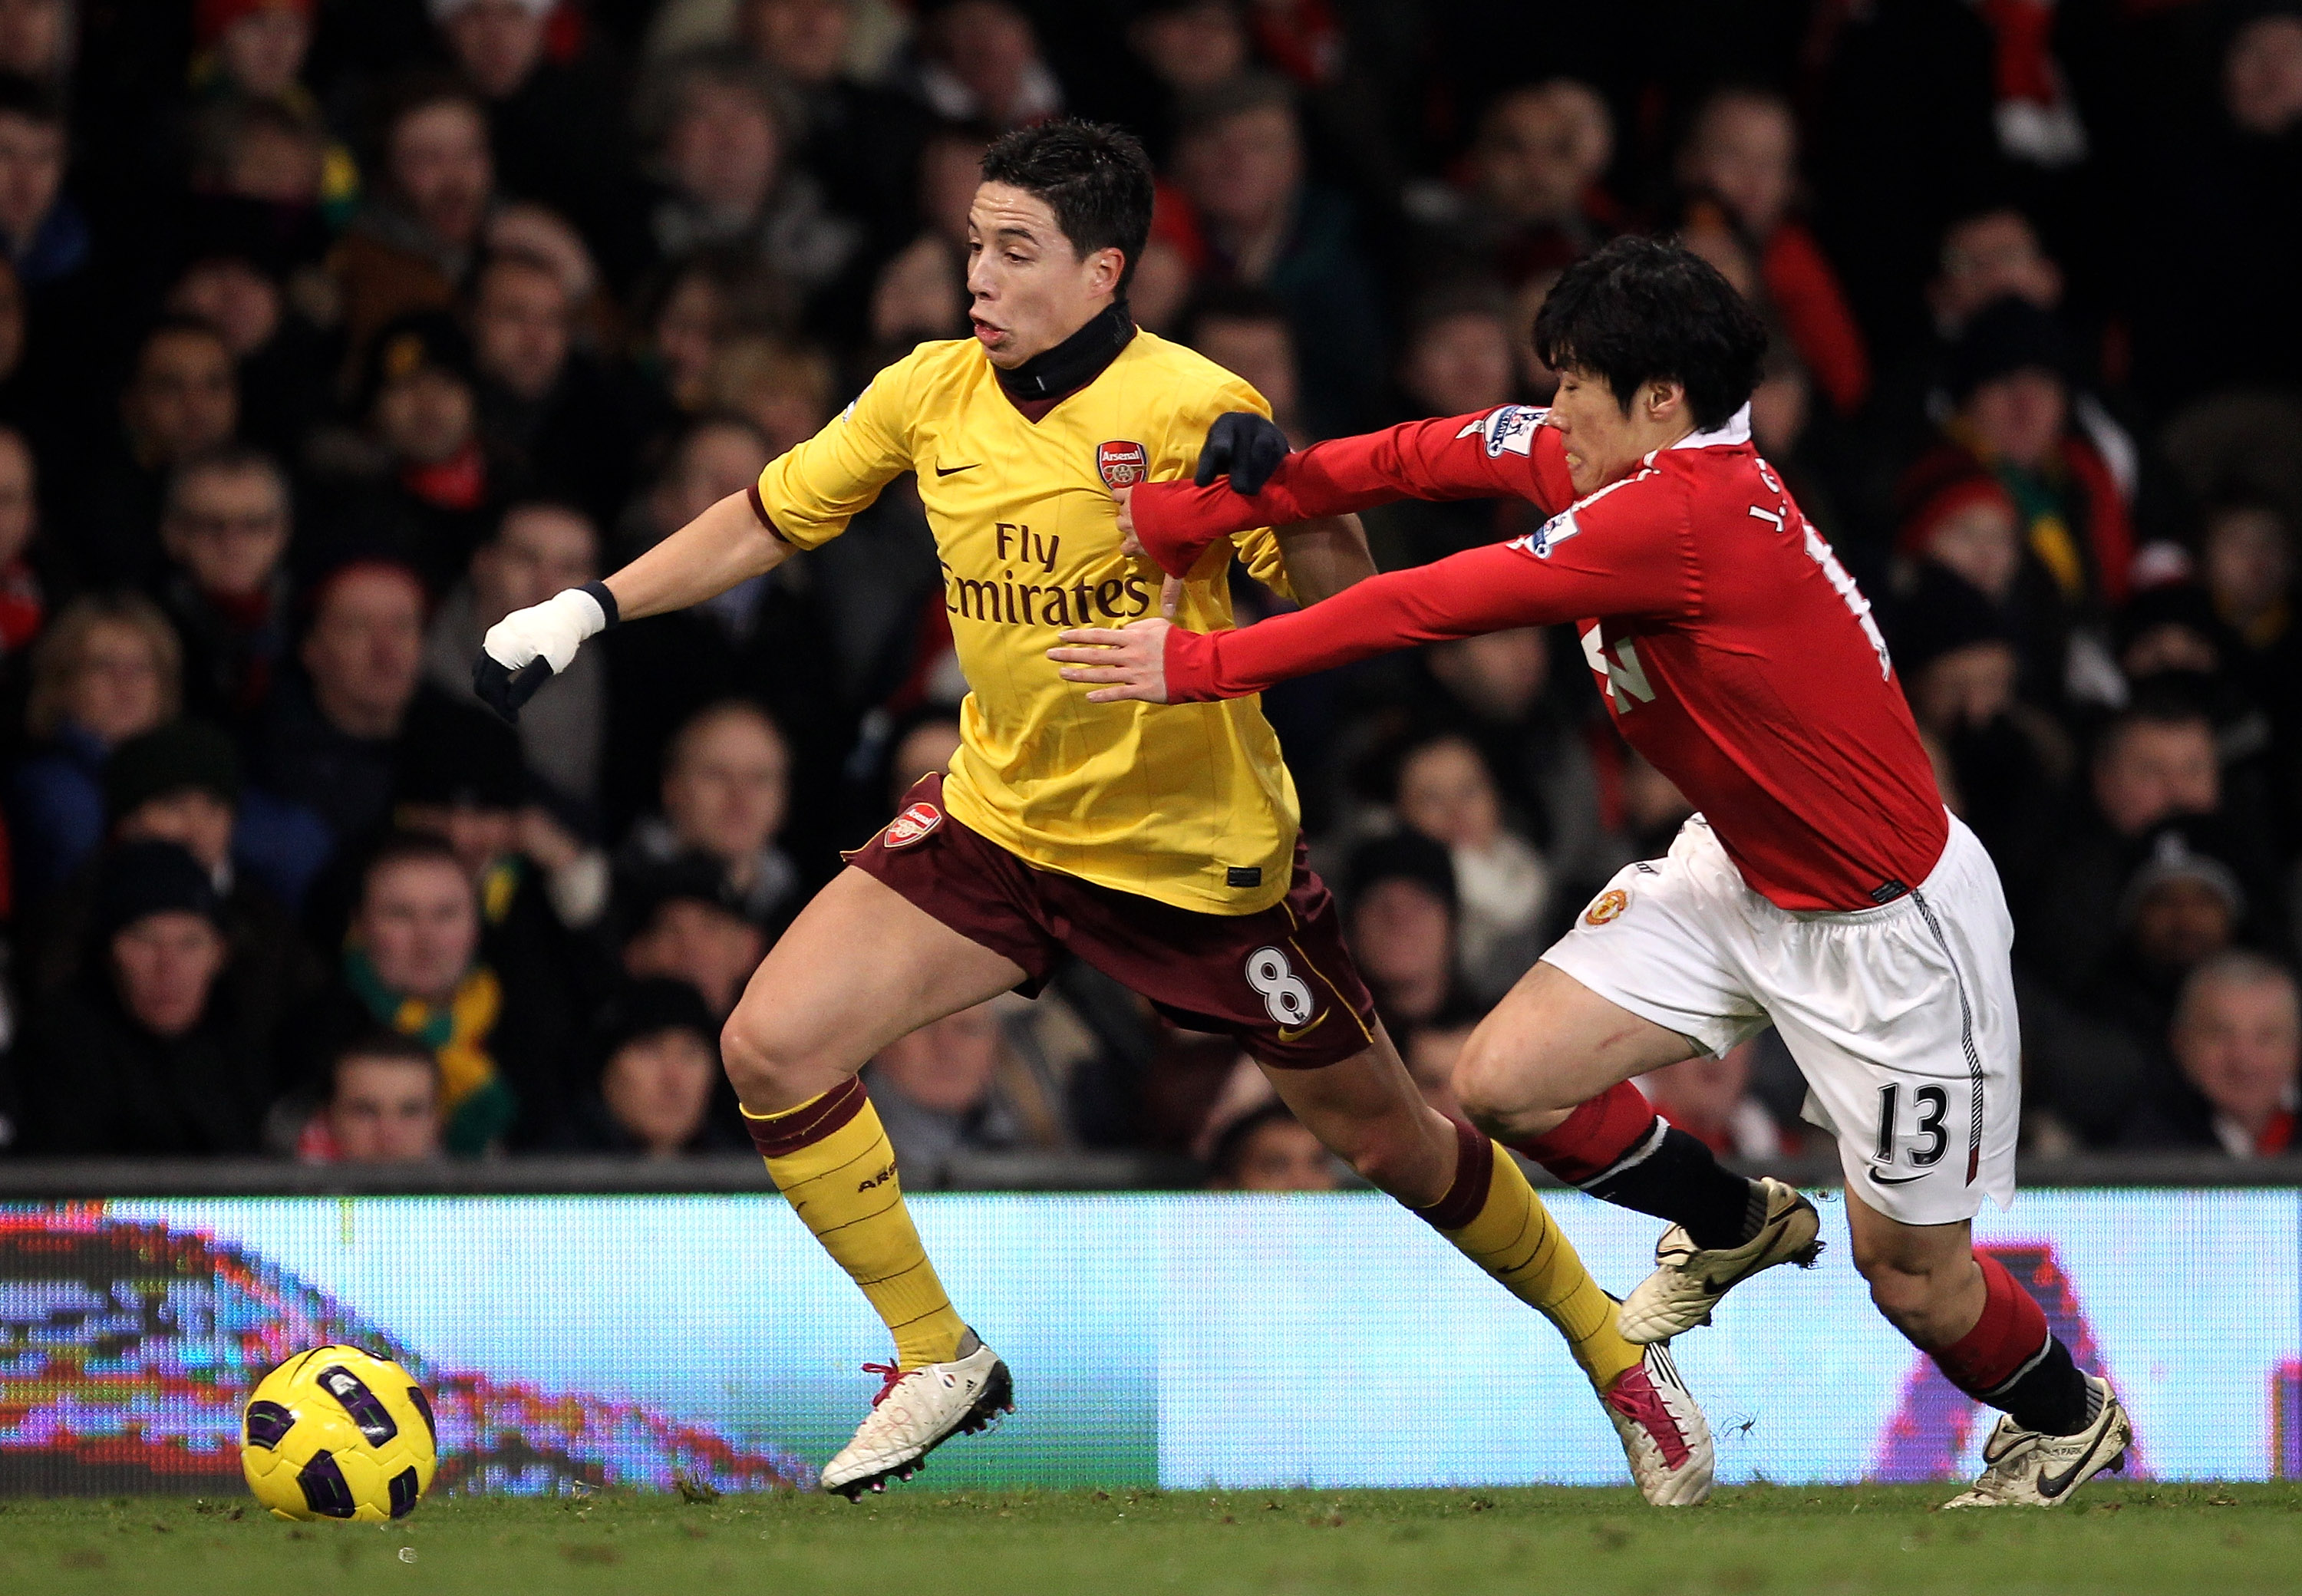 MANCHESTER, ENGLAND - DECEMBER 13:  Samir Nasri of Arsenal is challenged by Ji-Sung Park of Manchester United during the Barclays Premier League match between Manchester United and Arsenal at Old Trafford on December 13, 2010 in Manchester, England.  (Pho